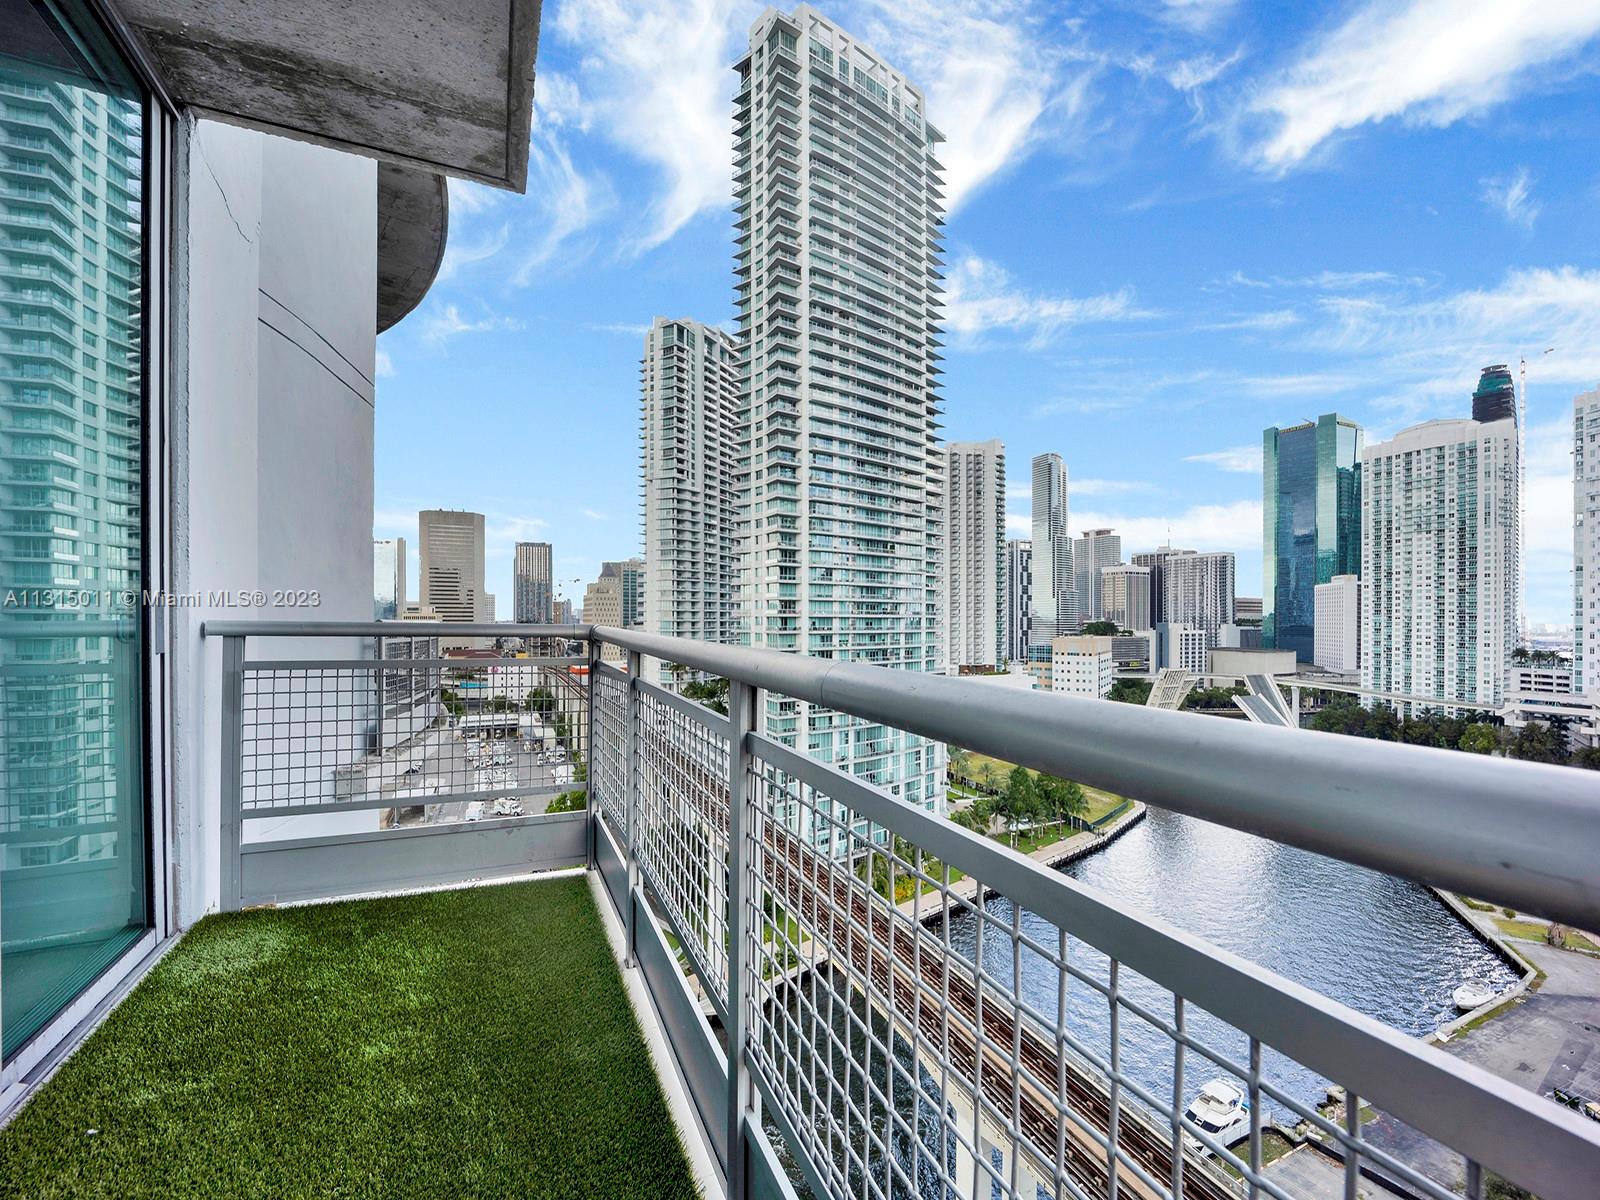 Gorgeous 2 story loft with 2 balconies in the heart of Brickell City. Facing Miami River and Brickell City Centre. Walking Distance to many Brickell has to offer: Mary Brickell Village, Riverside Miami, Brickell City Centre, and many more. The building features numerous amenities include: fitness center, pool, sauna and steam room, racquetball court, 24hrs concierge service.